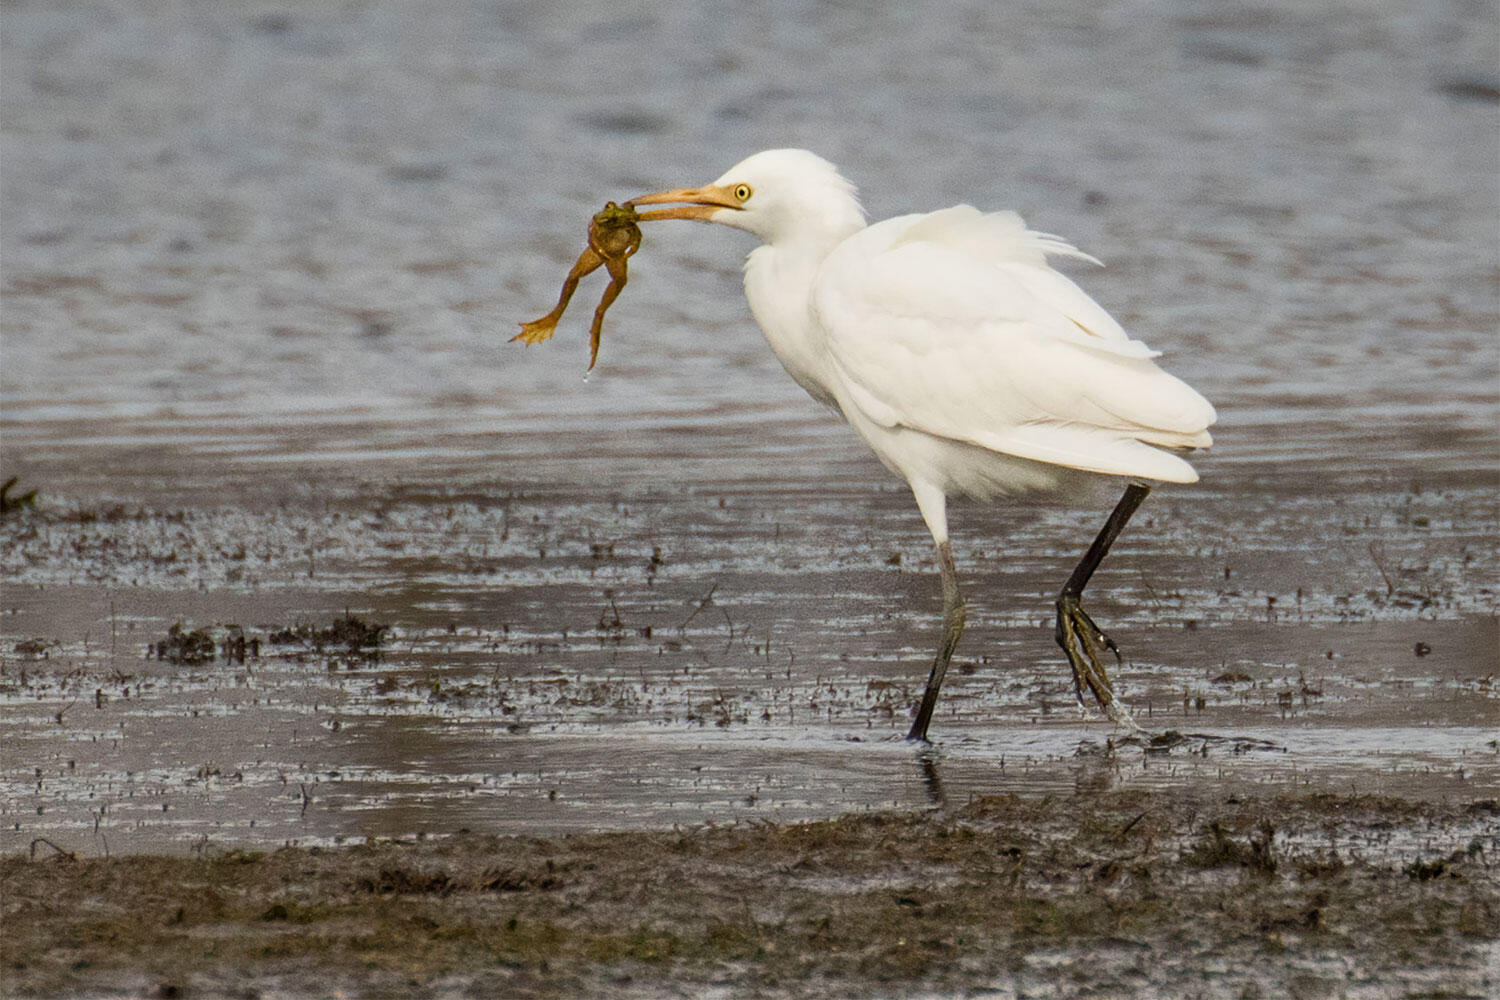 A Western Cattle Egret walks through shallow water with a toad in its bill.